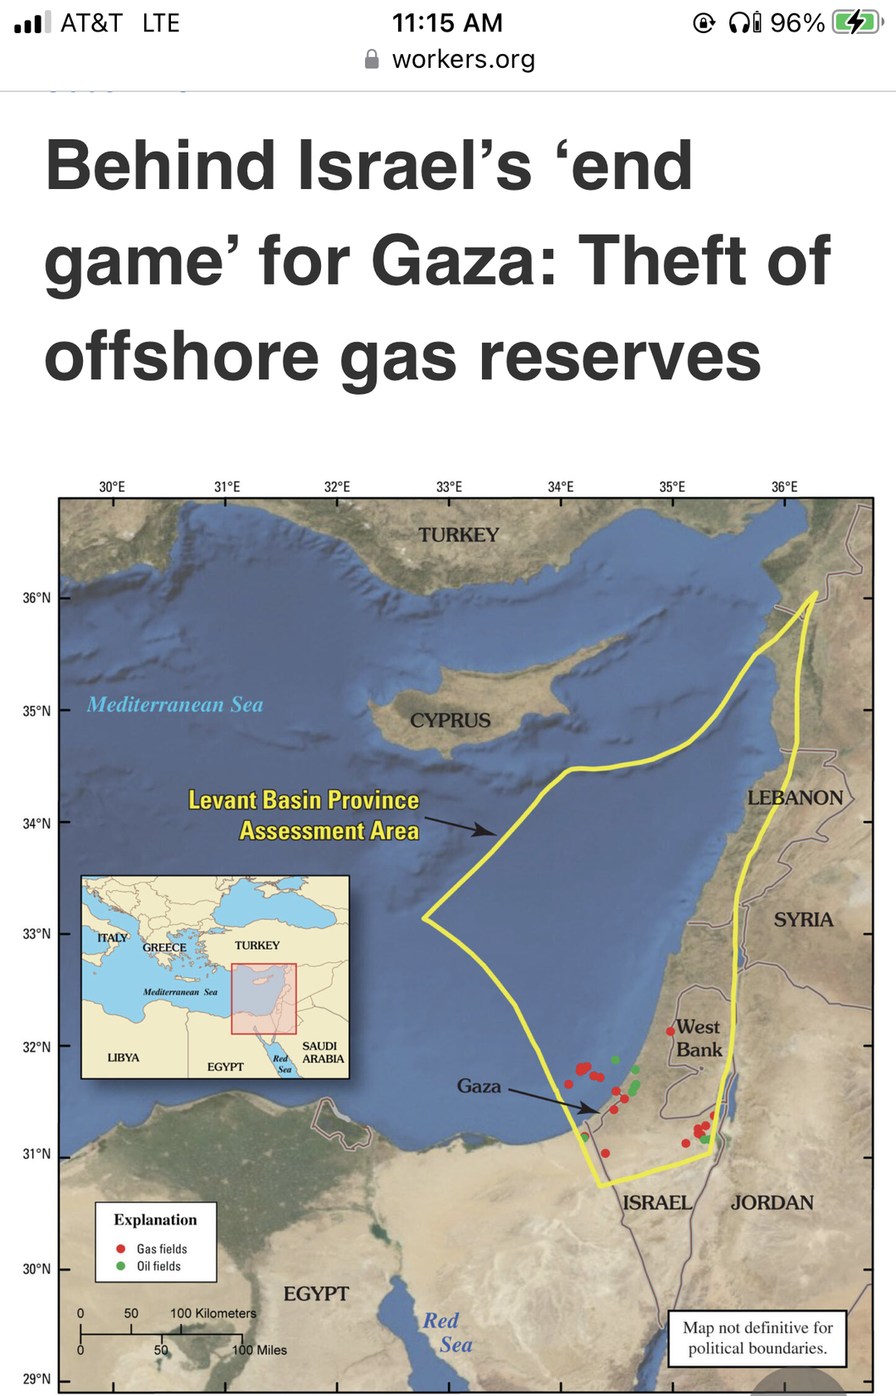 Gas in the north push Palestines to the south - meme